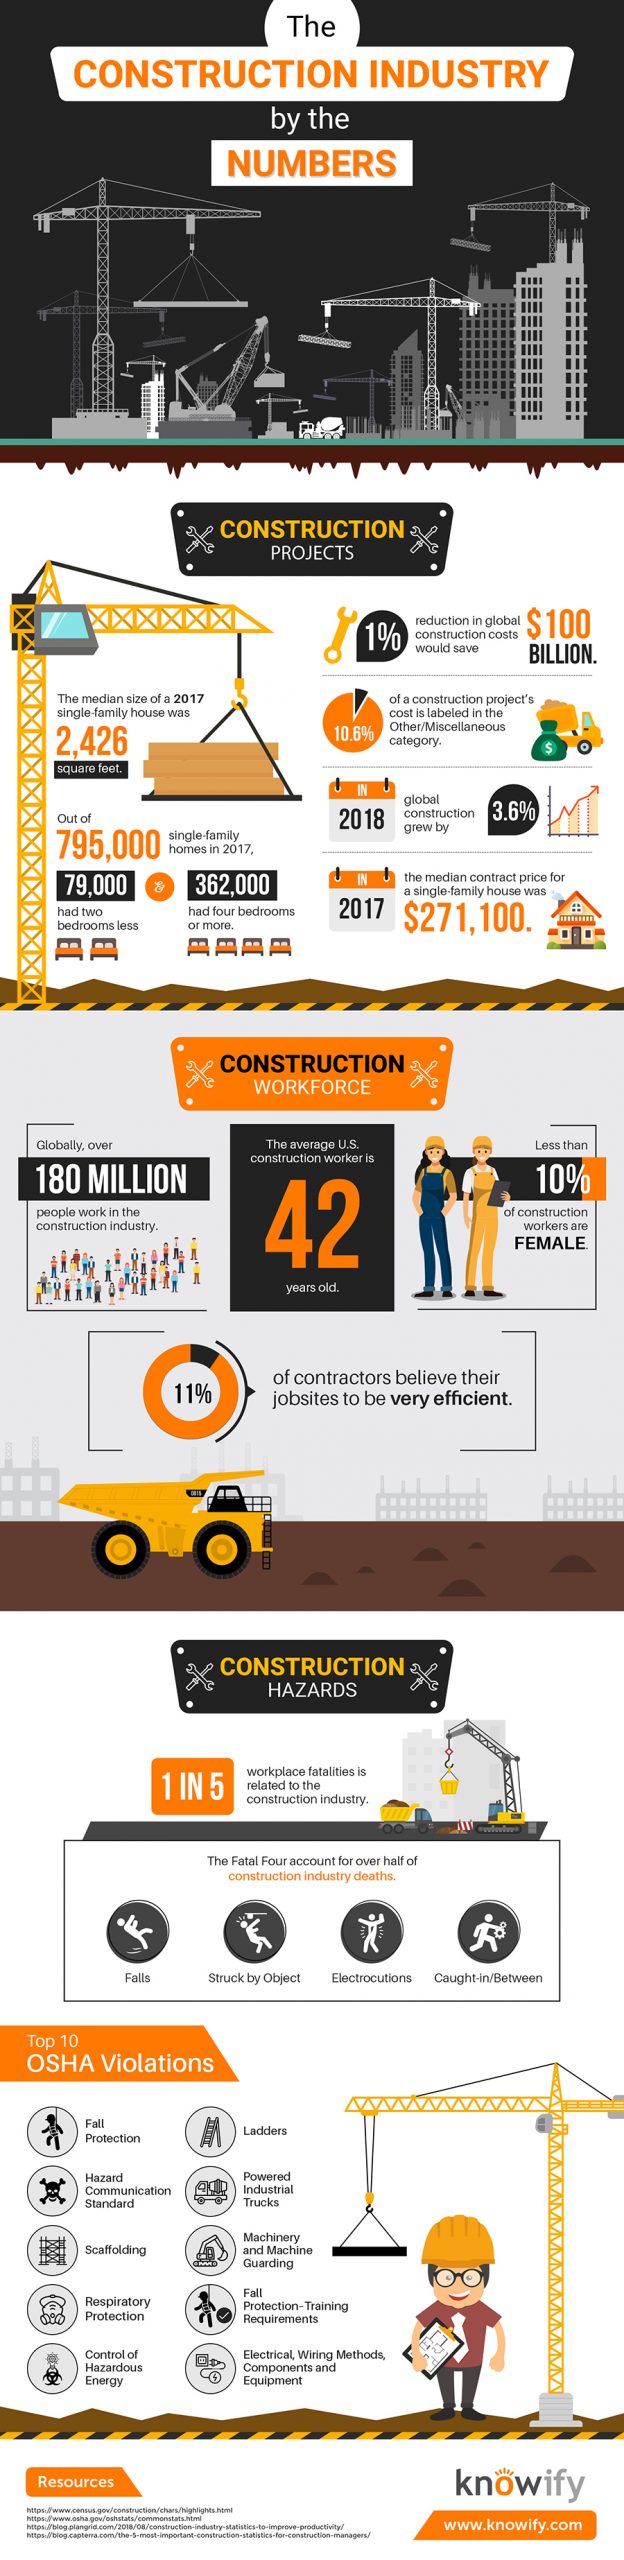 Infographic summarizing statistics of the construction industry | Knowify